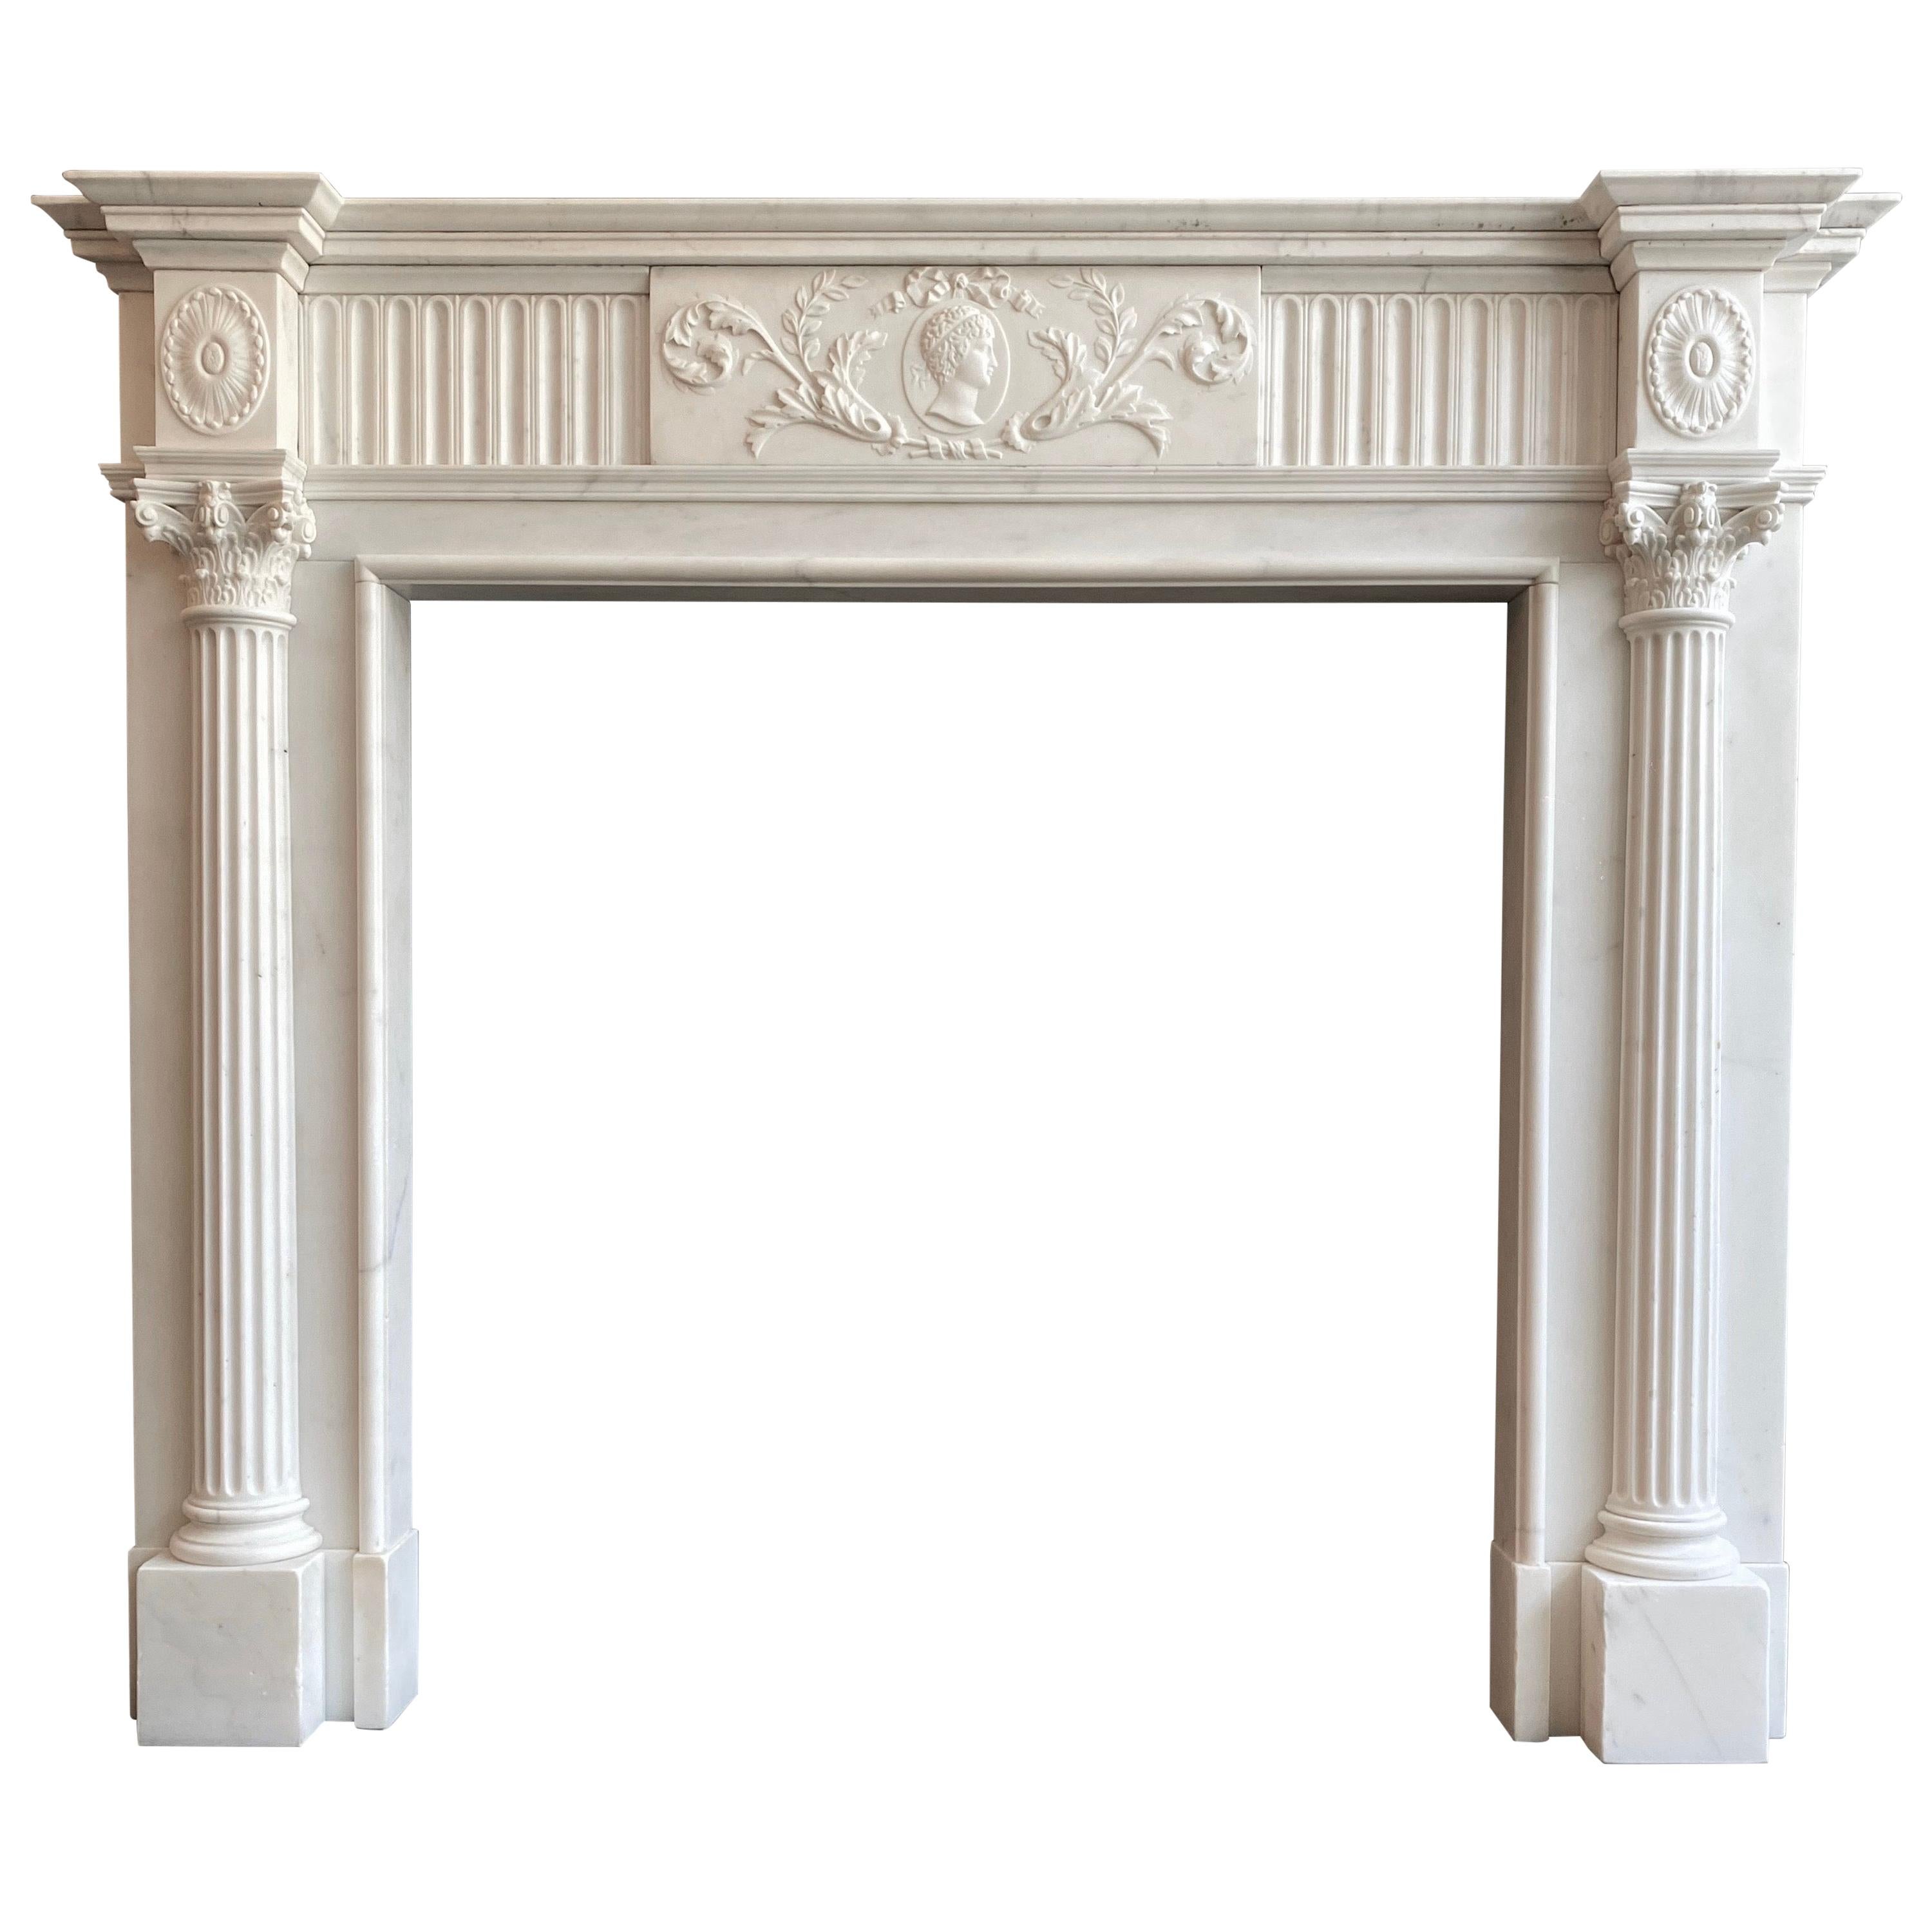 A late 18th century exquisitely carved George III chimneypiece executed in Statuary white marble. The central tablet carved with a male Greek medallion, with bow tied ribbon and scrolled acanthus. Flanked by panels of stop flutes with end blocks of